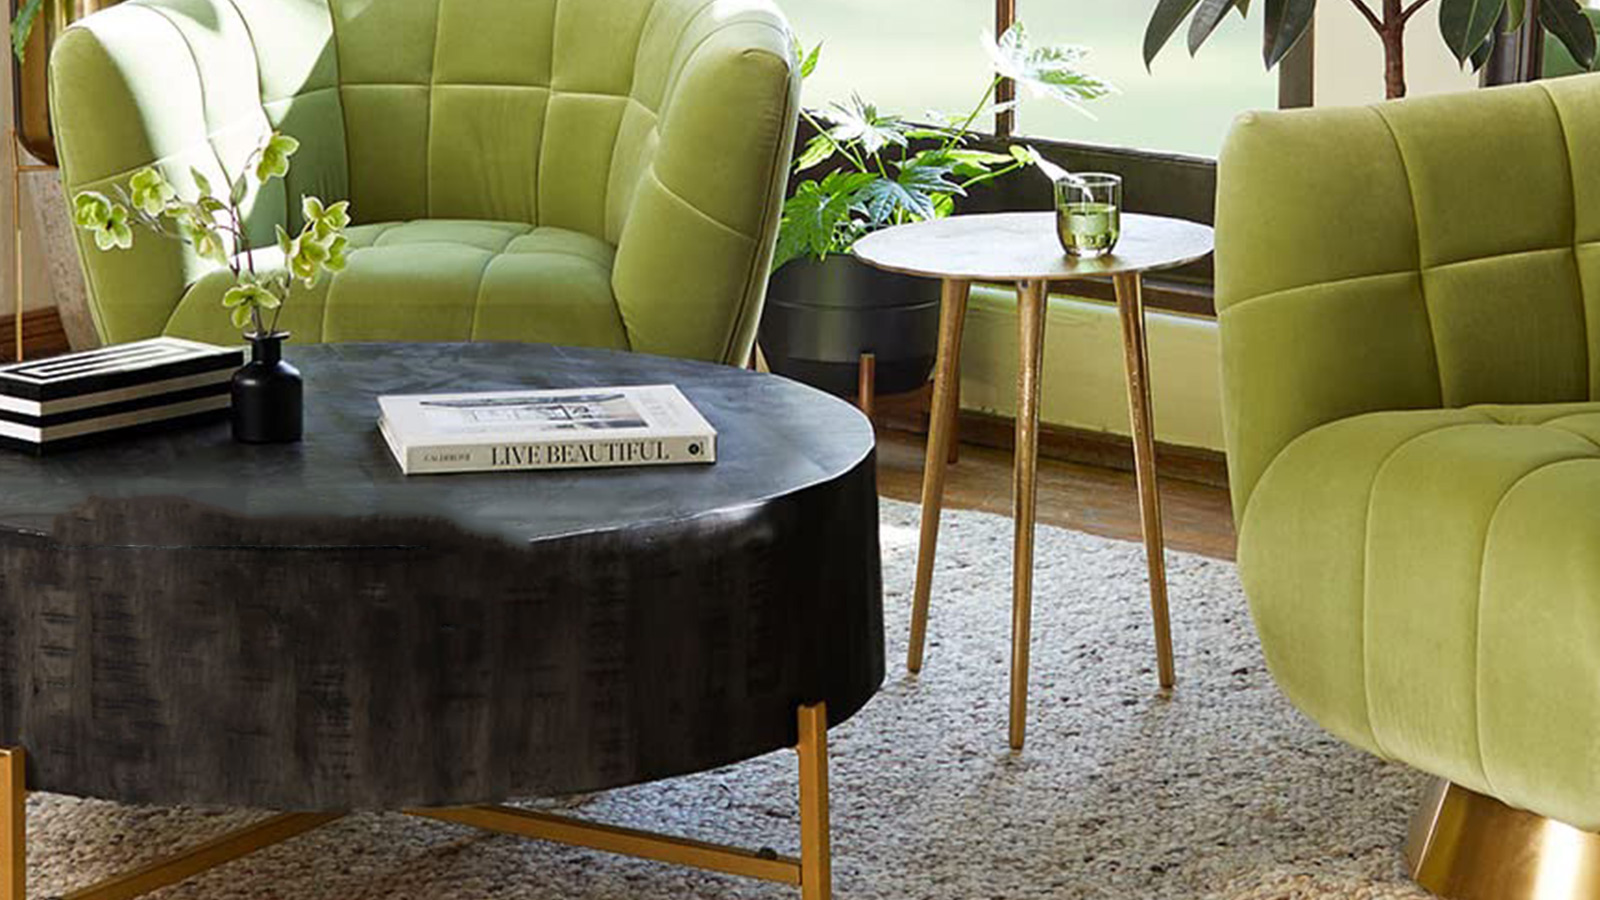 This is an interior scene featuring modern furniture. In the foreground is a coffee table with a dark, glossy surface, sitting on golden legs. On the table are a striped black-and-white book, a small black vase with green flowers, and a large book titled "LIVE BEAUTIFUL". To the right, there's a small side table with a marble top and golden legs, holding a clear glass with a greenish liquid. Two plush, lime green armchairs with tufted backrests flank the tables, their velvety fabric catching the light.